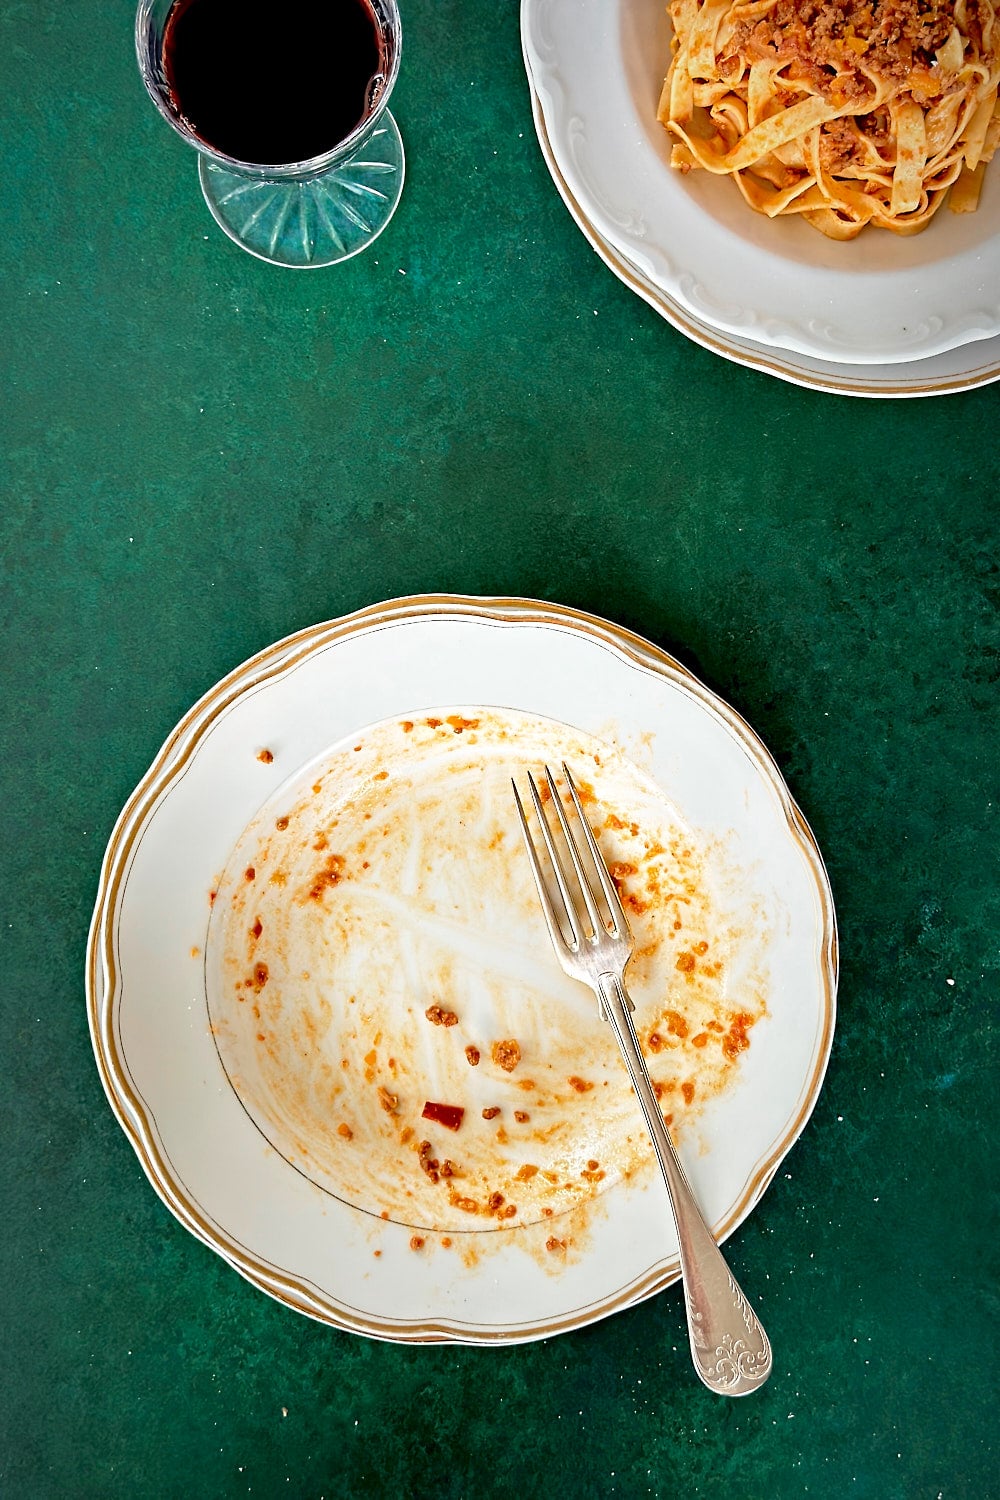 An empty plate after eating a portion of tagliatelle alla bolognese.